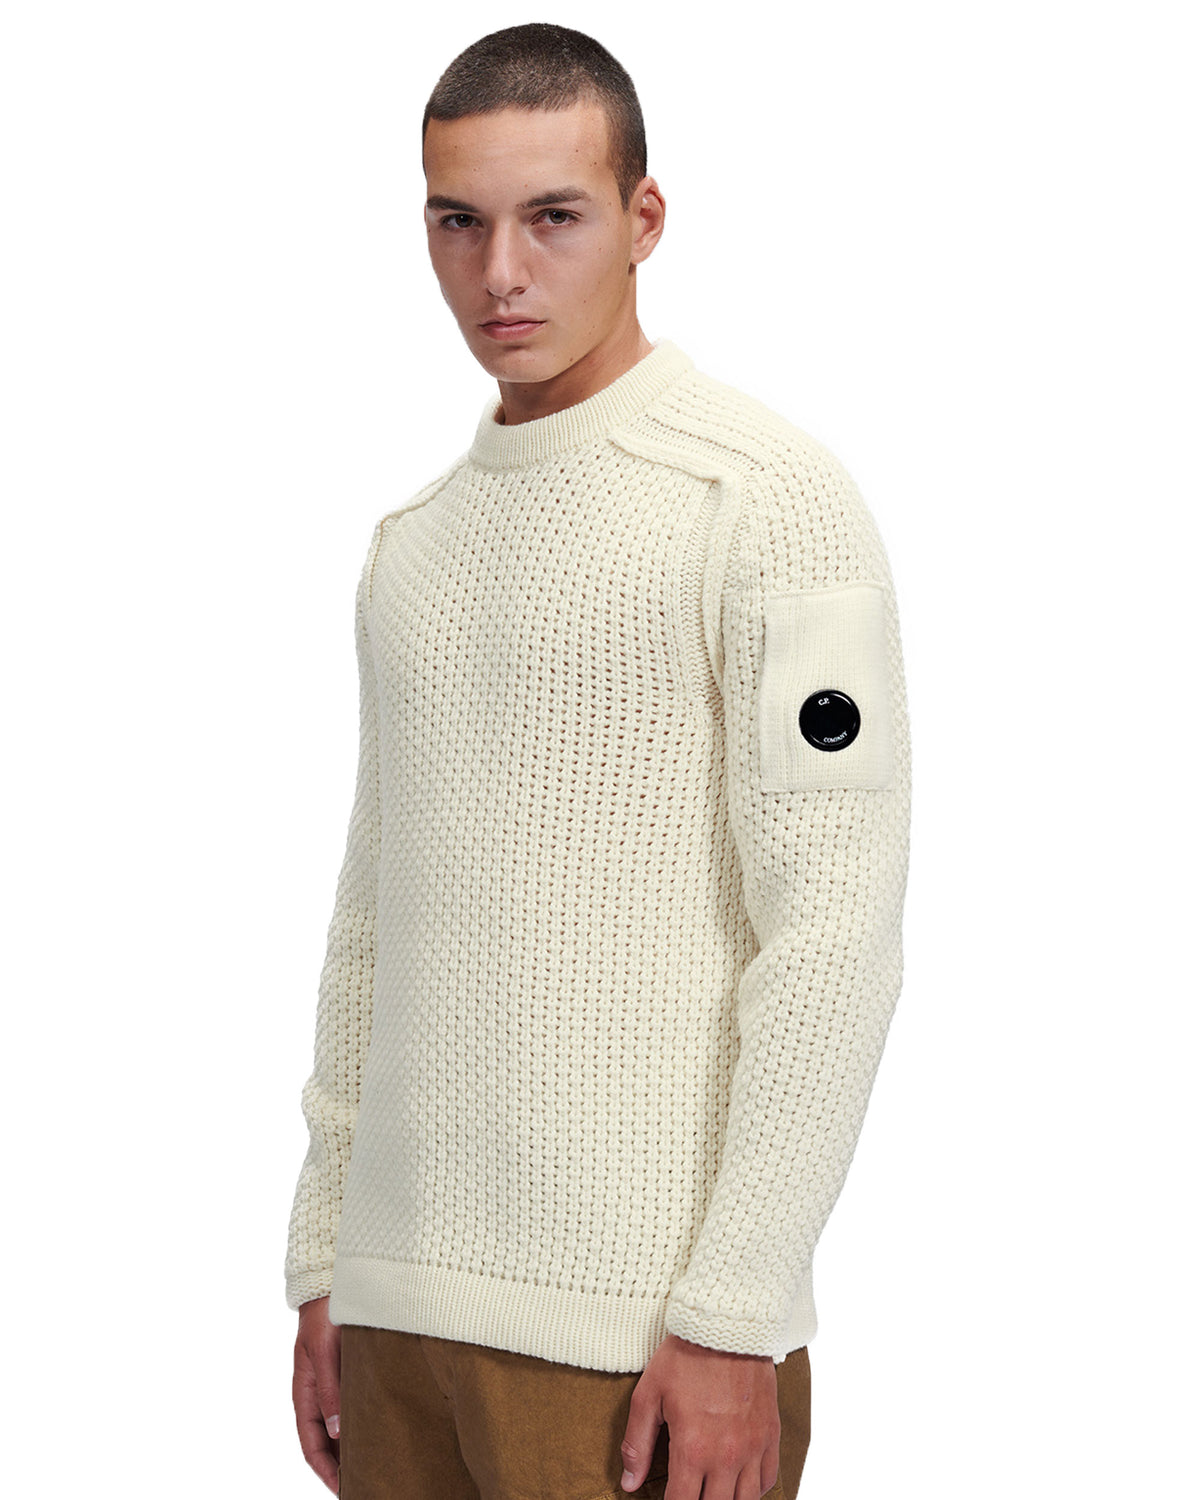 Maglione CP Comany Knitwear Lambswool Bianco